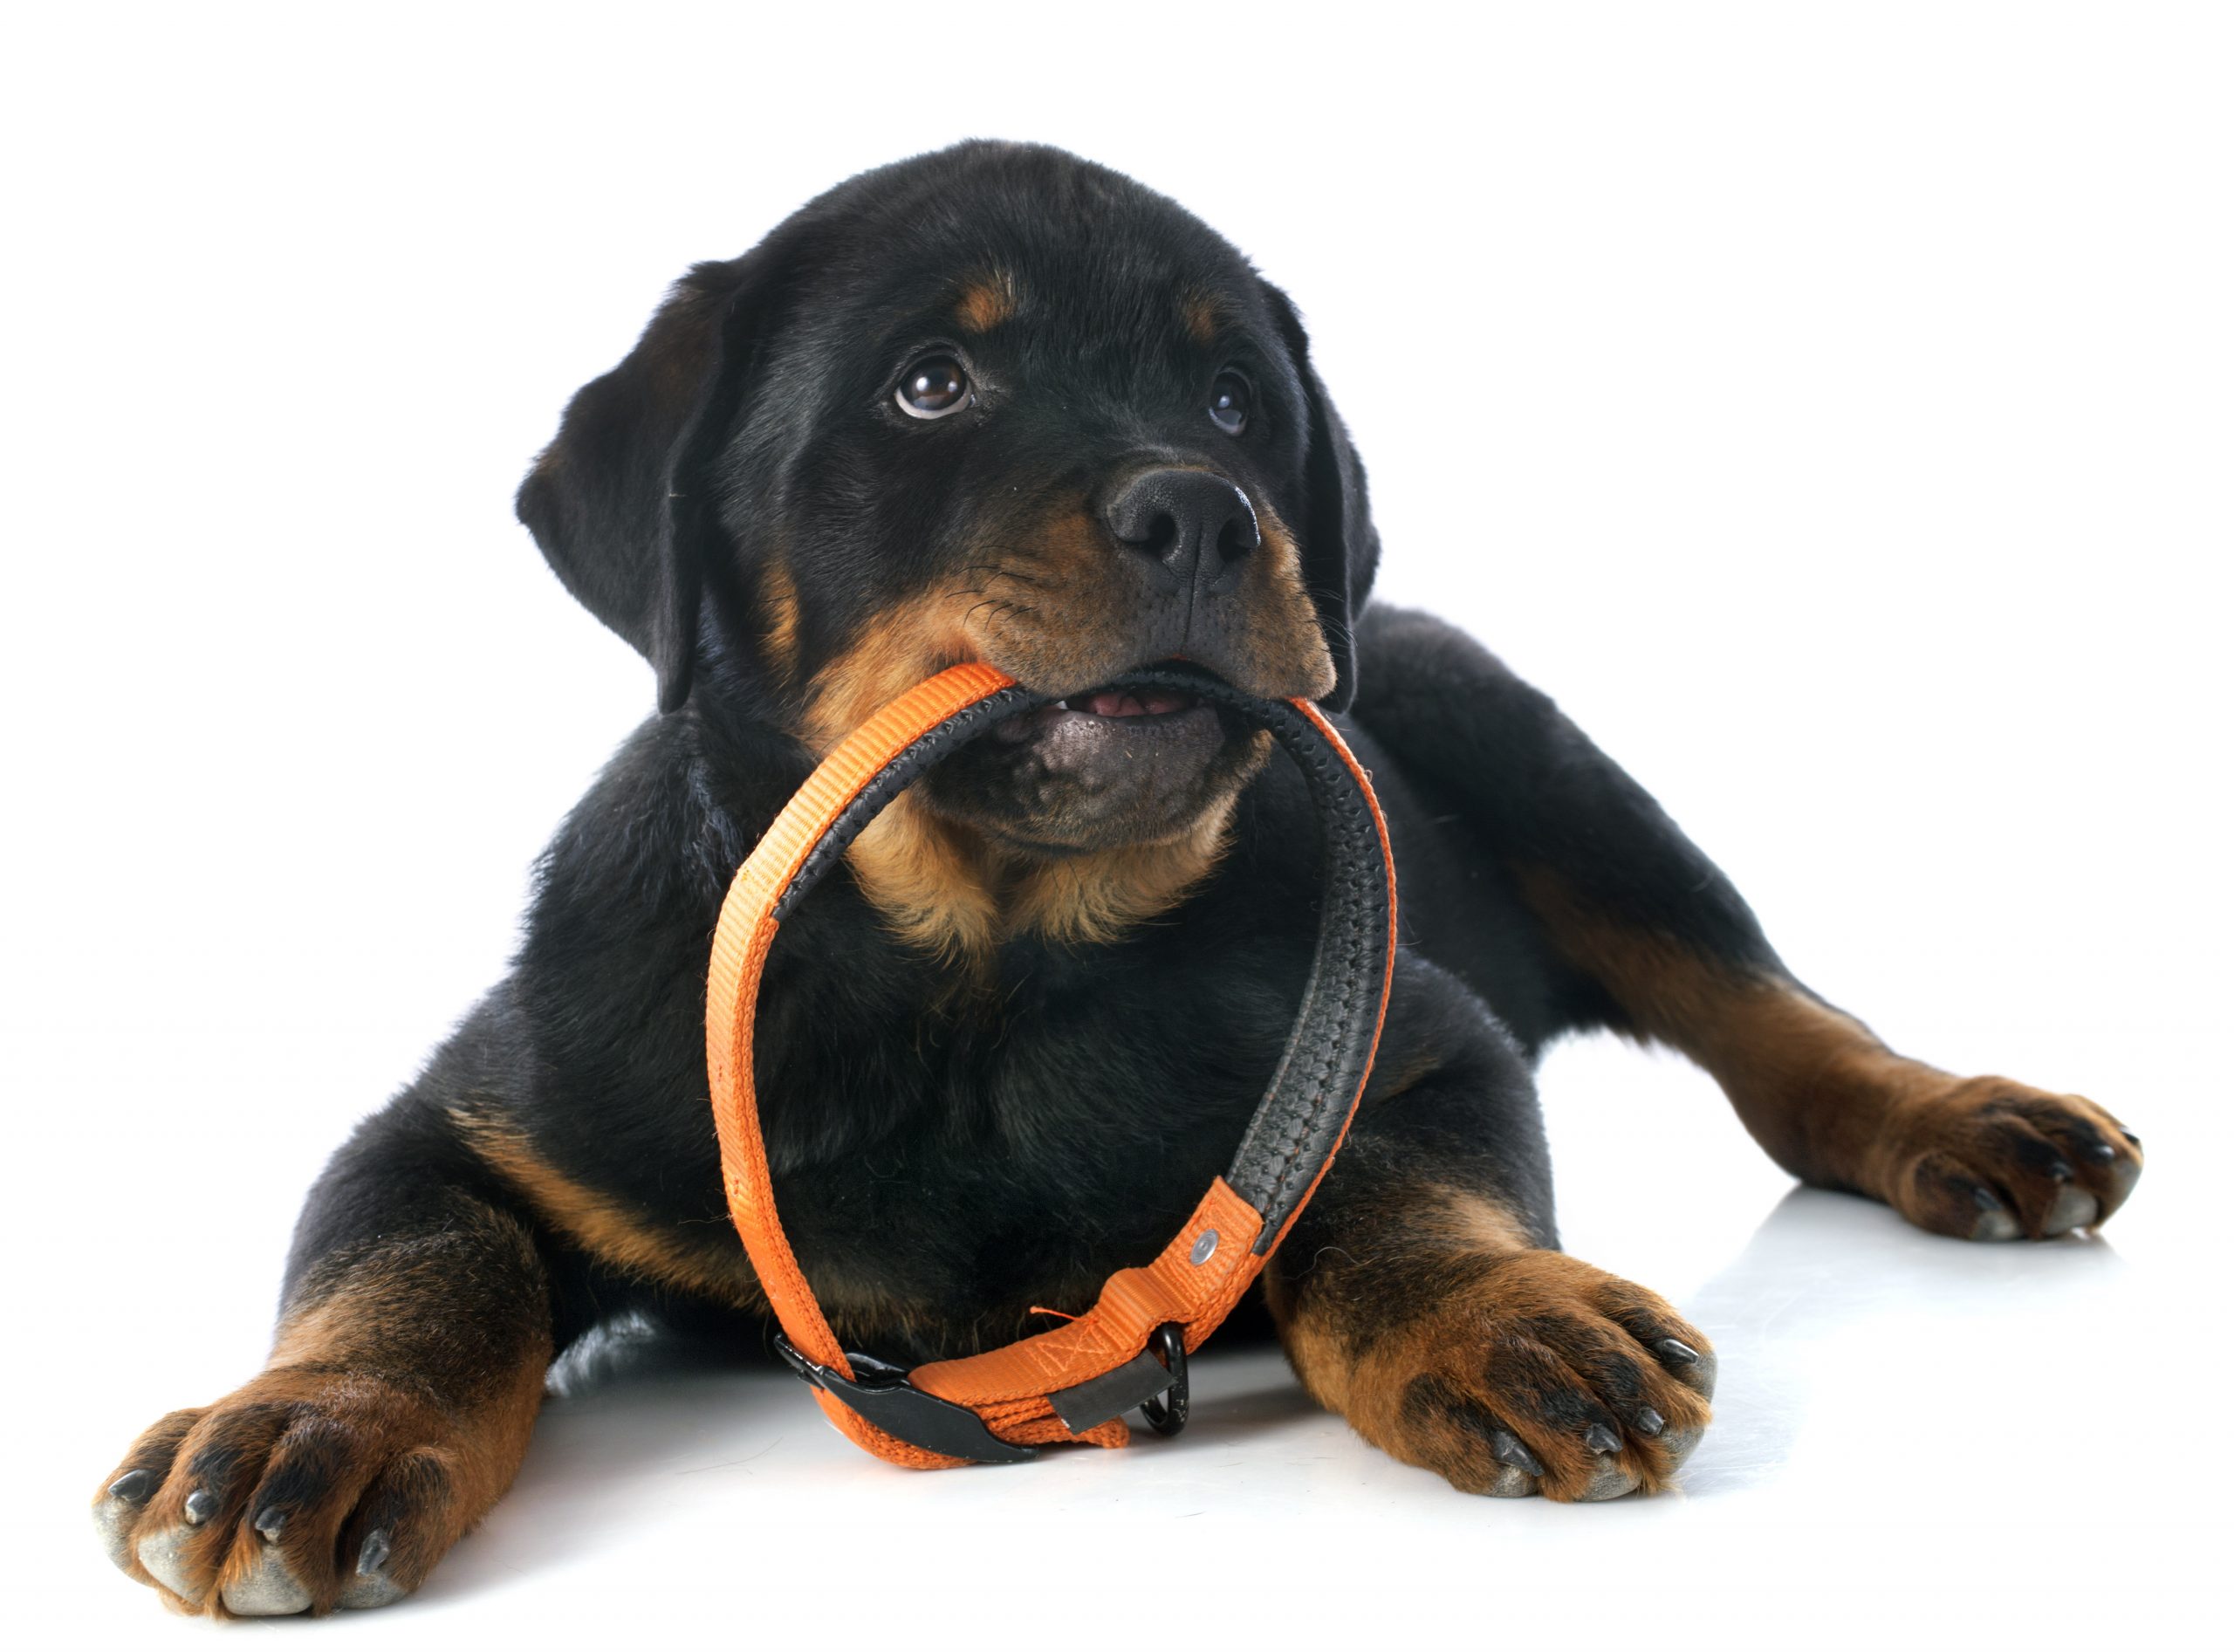 New Puppy Checklist: 10 Must-Have Items